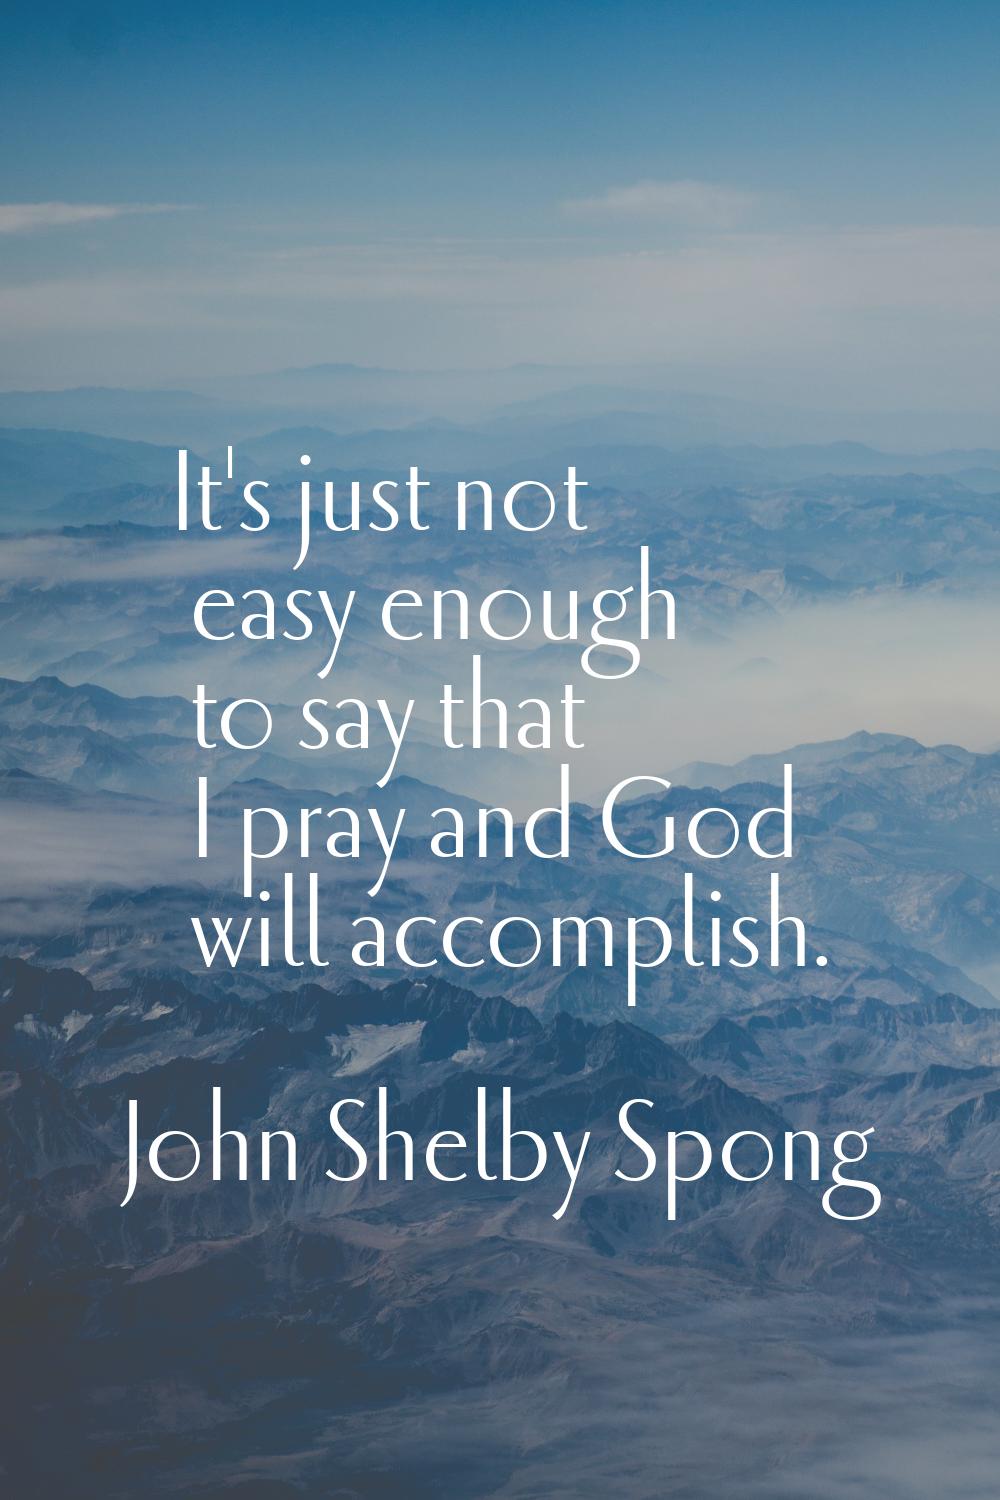 It's just not easy enough to say that I pray and God will accomplish.